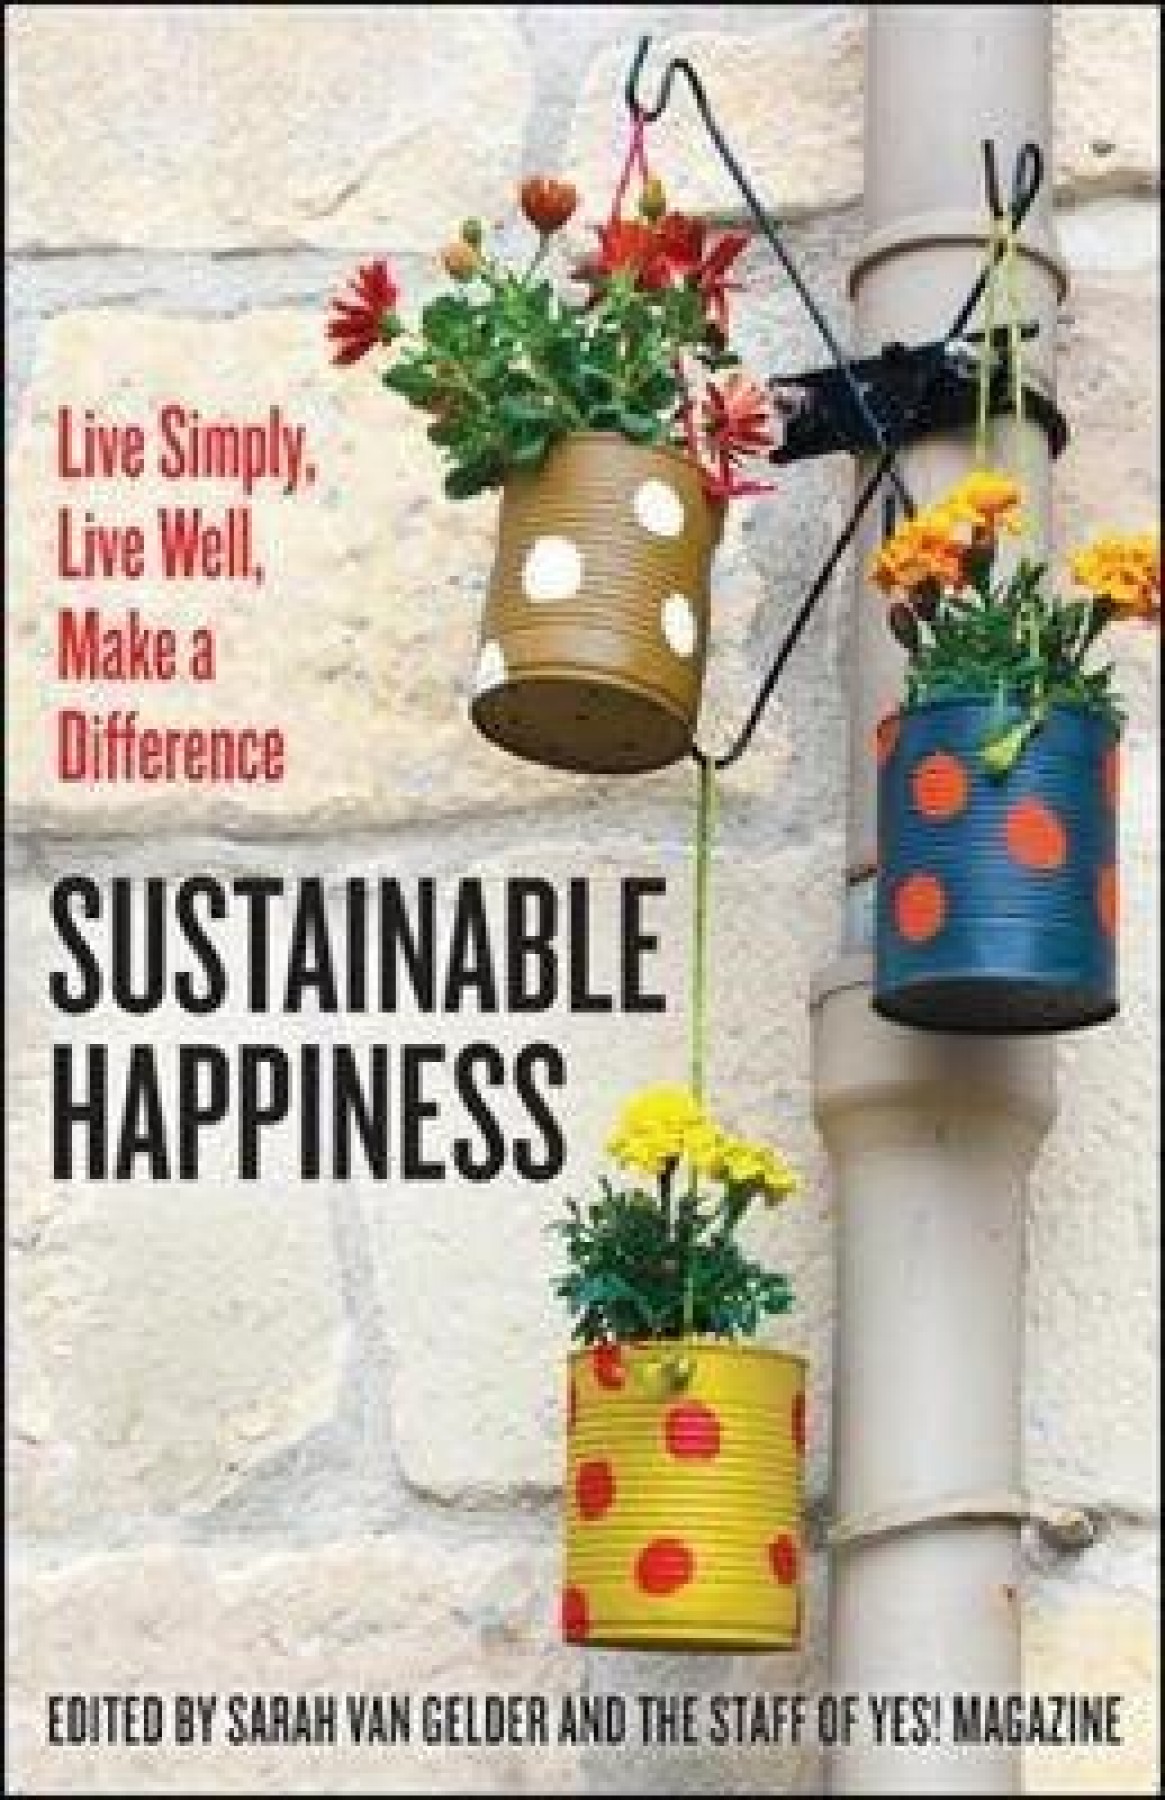 Sustainable happiness: Live simply, live well, make a difference